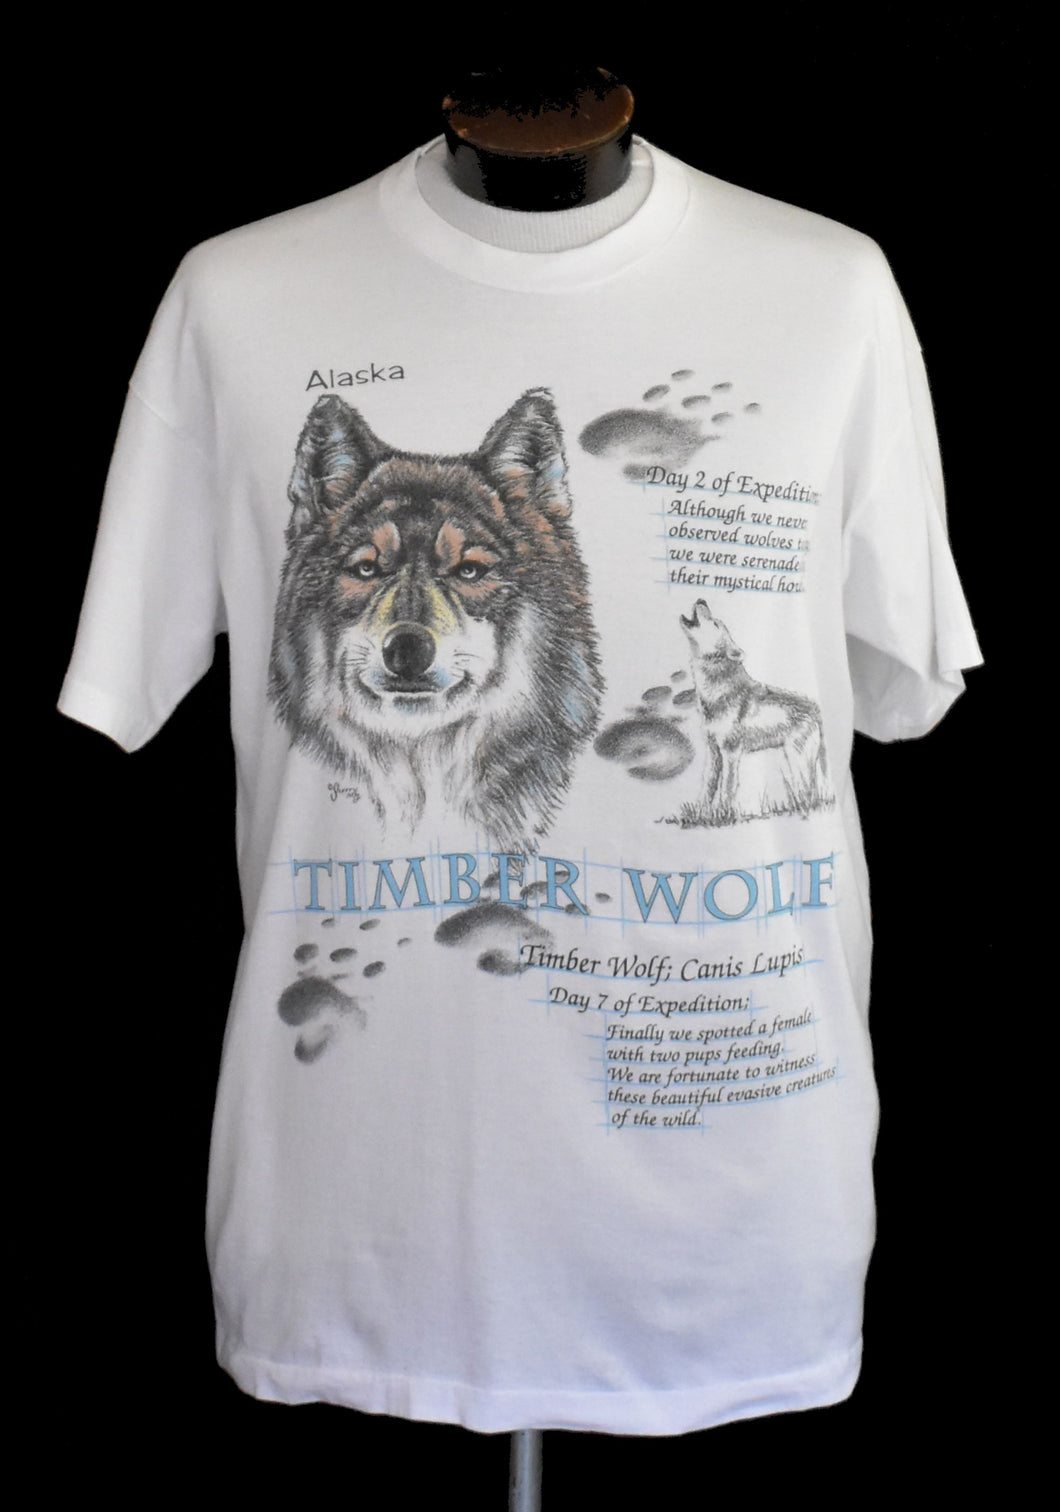 Vintage 90s Alaska Timber Wolf Wolves Environmental Tee Size Large to XL